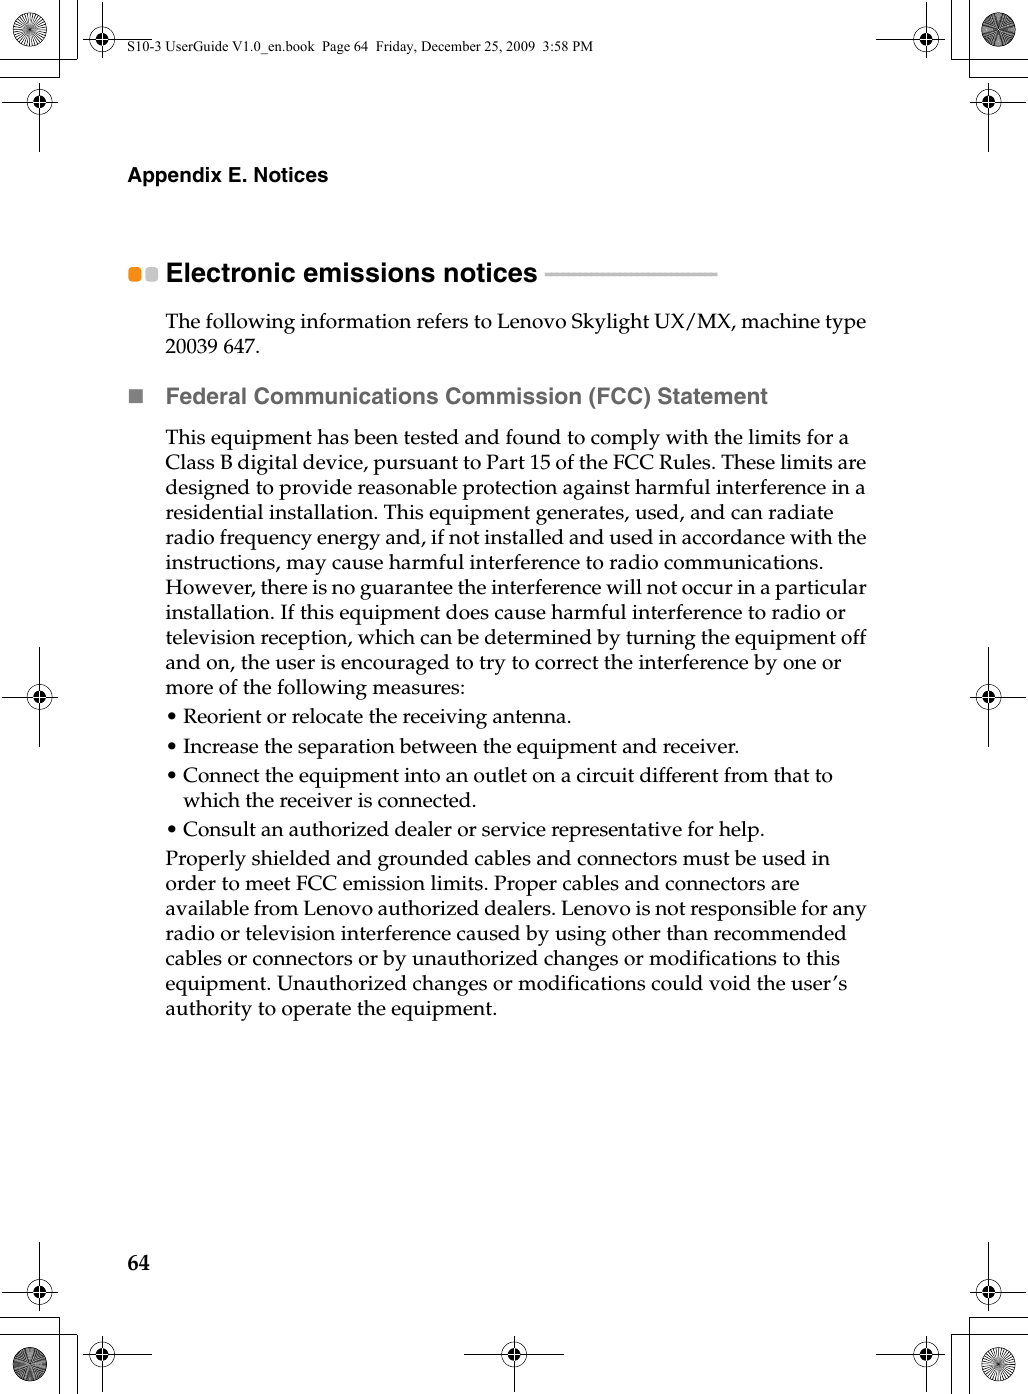 64Appendix E. NoticesElectronic emissions notices  - - - - - - - - - - - - - - - - - - - - - - - - - - - - - - The following information refers to Lenovo Skylight UX/MX, machine type 20039 647.Federal Communications Commission (FCC) StatementThis equipment has been tested and found to comply with the limits for a Class B digital device, pursuant to Part 15 of the FCC Rules. These limits are designed to provide reasonable protection against harmful interference in a residential installation. This equipment generates, used, and can radiate radio frequency energy and, if not installed and used in accordance with the instructions, may cause harmful interference to radio communications. However, there is no guarantee the interference will not occur in a particular installation. If this equipment does cause harmful interference to radio or television reception, which can be determined by turning the equipment off and on, the user is encouraged to try to correct the interference by one or more of the following measures:• Reorient or relocate the receiving antenna.• Increase the separation between the equipment and receiver.• Connect the equipment into an outlet on a circuit different from that to which the receiver is connected.• Consult an authorized dealer or service representative for help.Properly shielded and grounded cables and connectors must be used in order to meet FCC emission limits. Proper cables and connectors are available from Lenovo authorized dealers. Lenovo is not responsible for any radio or television interference caused by using other than recommended cables or connectors or by unauthorized changes or modifications to this equipment. Unauthorized changes or modifications could void the user’s authority to operate the equipment.S10-3 UserGuide V1.0_en.book  Page 64  Friday, December 25, 2009  3:58 PM